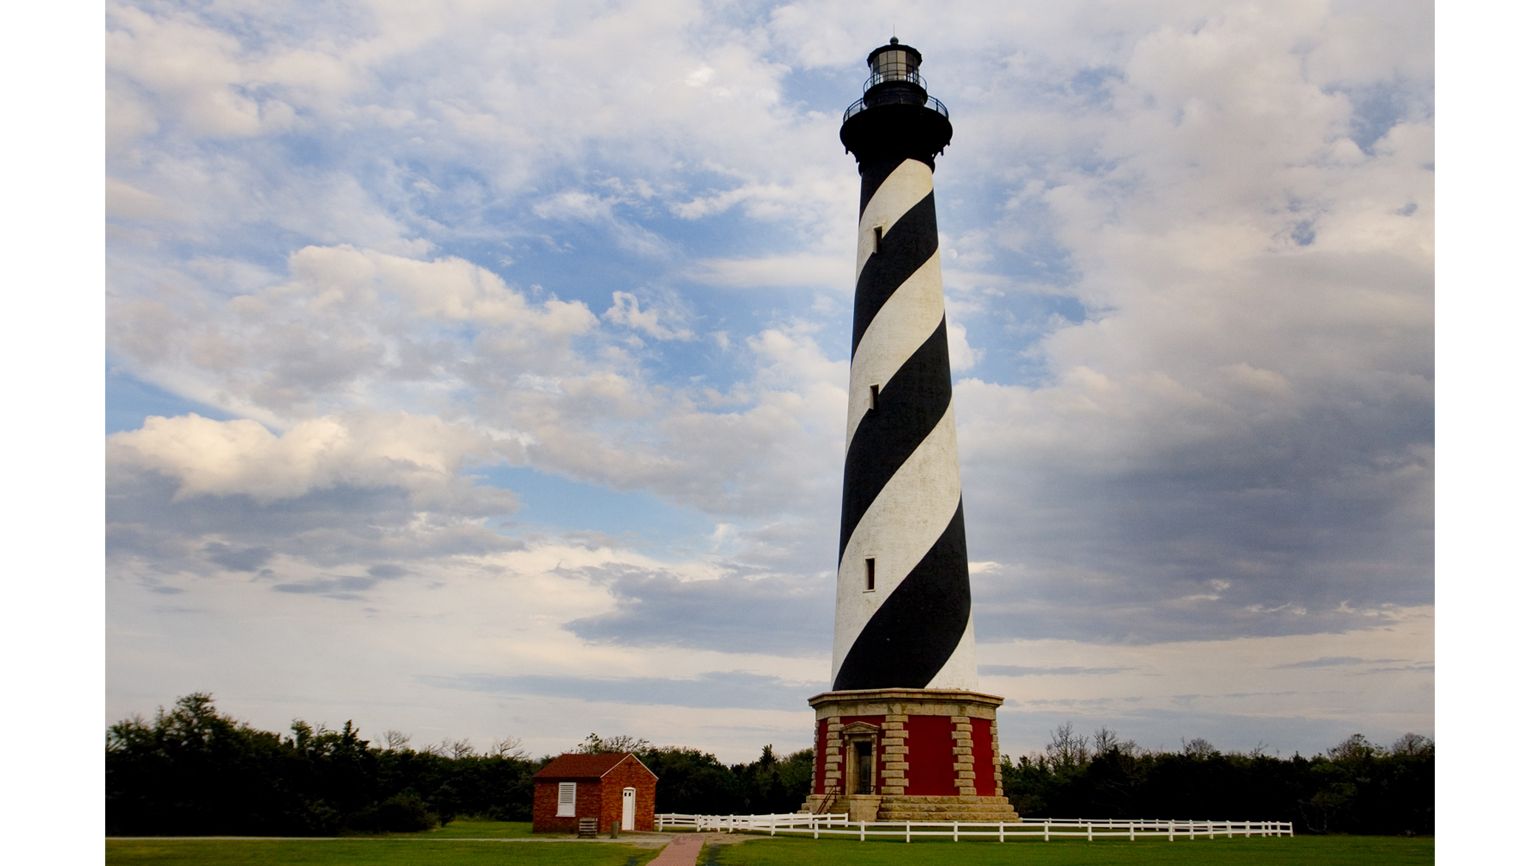 Cape Hatteras Lighthouse in Buxton North Carolina.